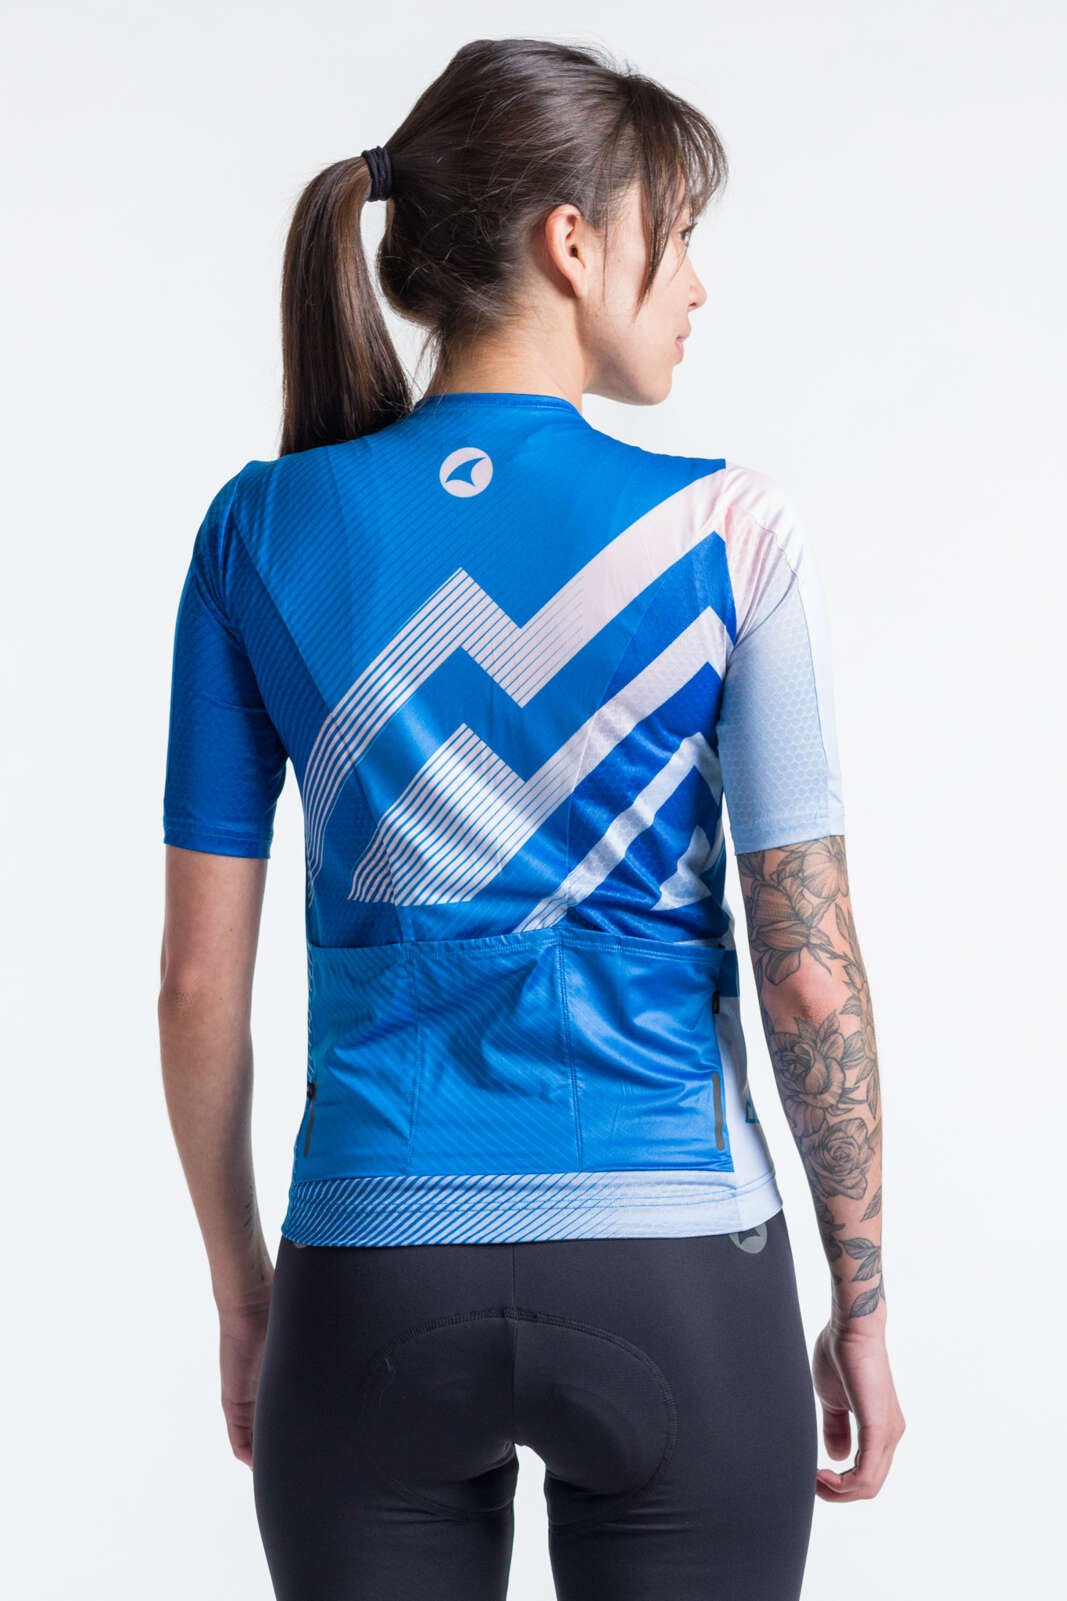 Women's Best Blue Cycling Jersey - Summit Pitch Back View